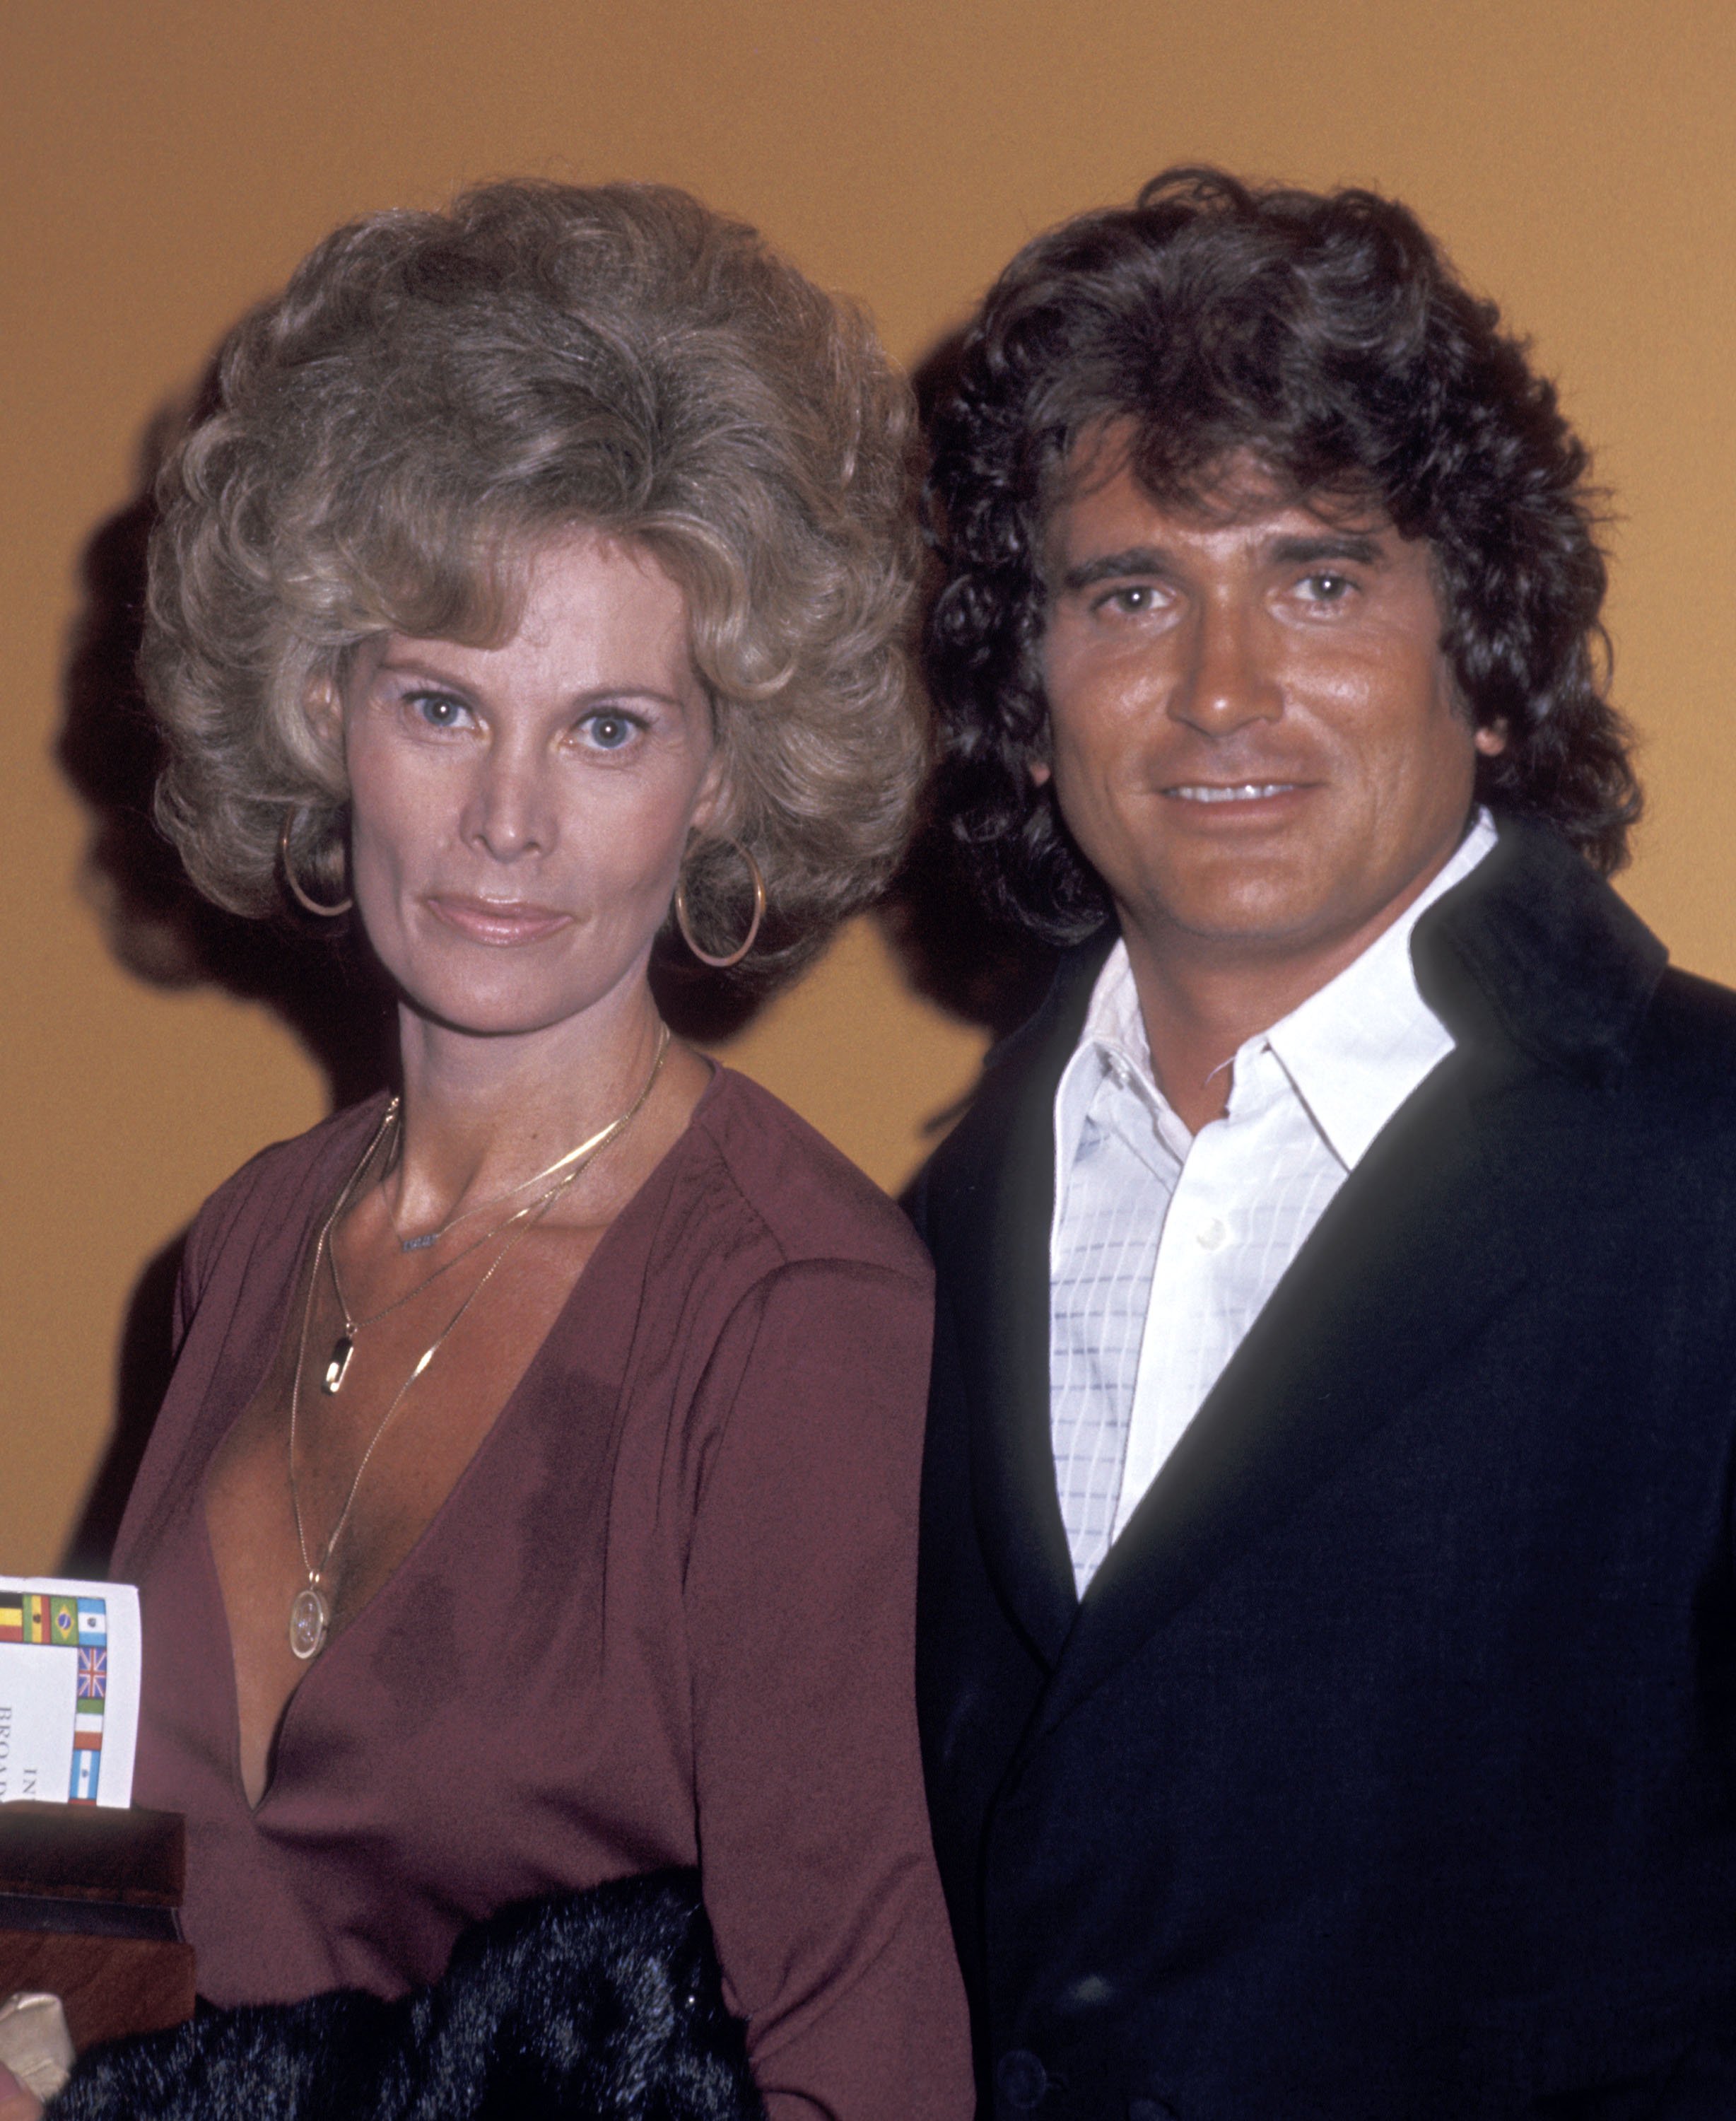 Michael Landon with Lynn Noe in Los Angeles 1976 | Source: Getty Images 